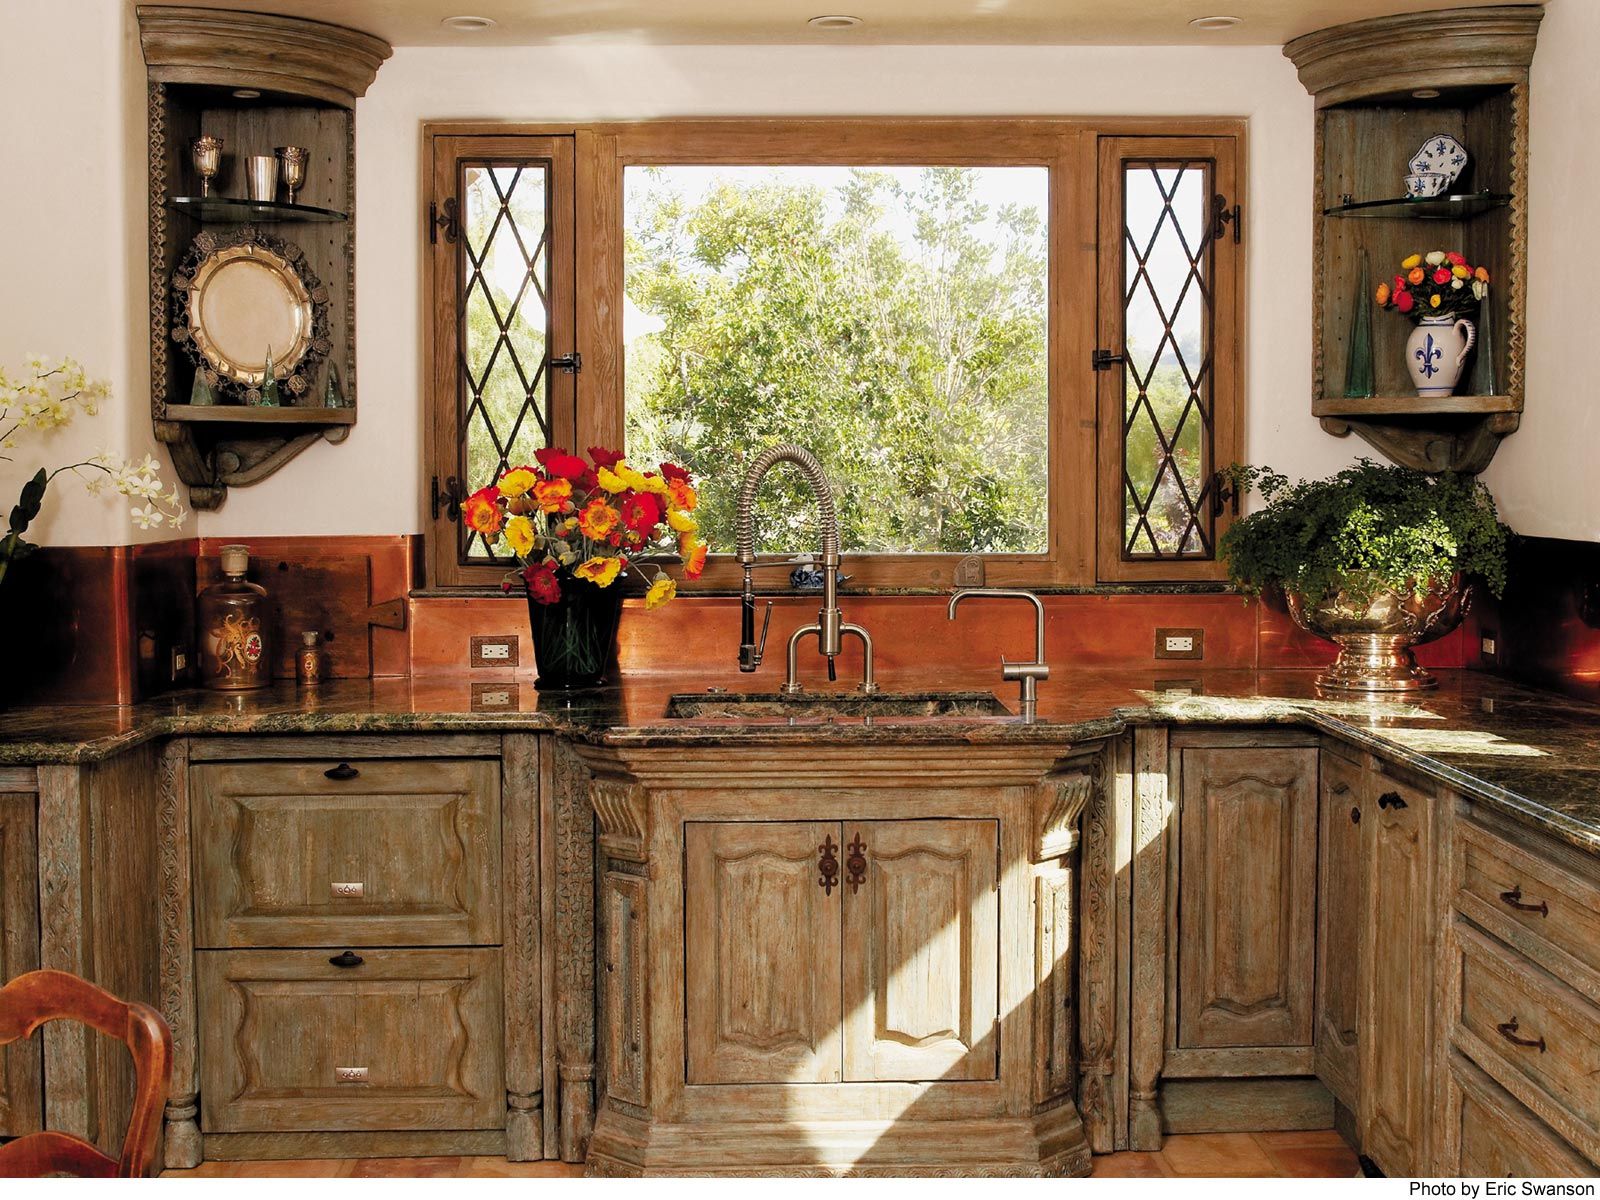 Country Kitchen Corner Wooden Country Kitchen Cabinets In Corner Space Beside Amusing Window Model Closed Nice Backsplash Design Near Pretty Flowers Decor Kitchen Ideas For The Affordable Yet Chic Country Kitchen Cabinets